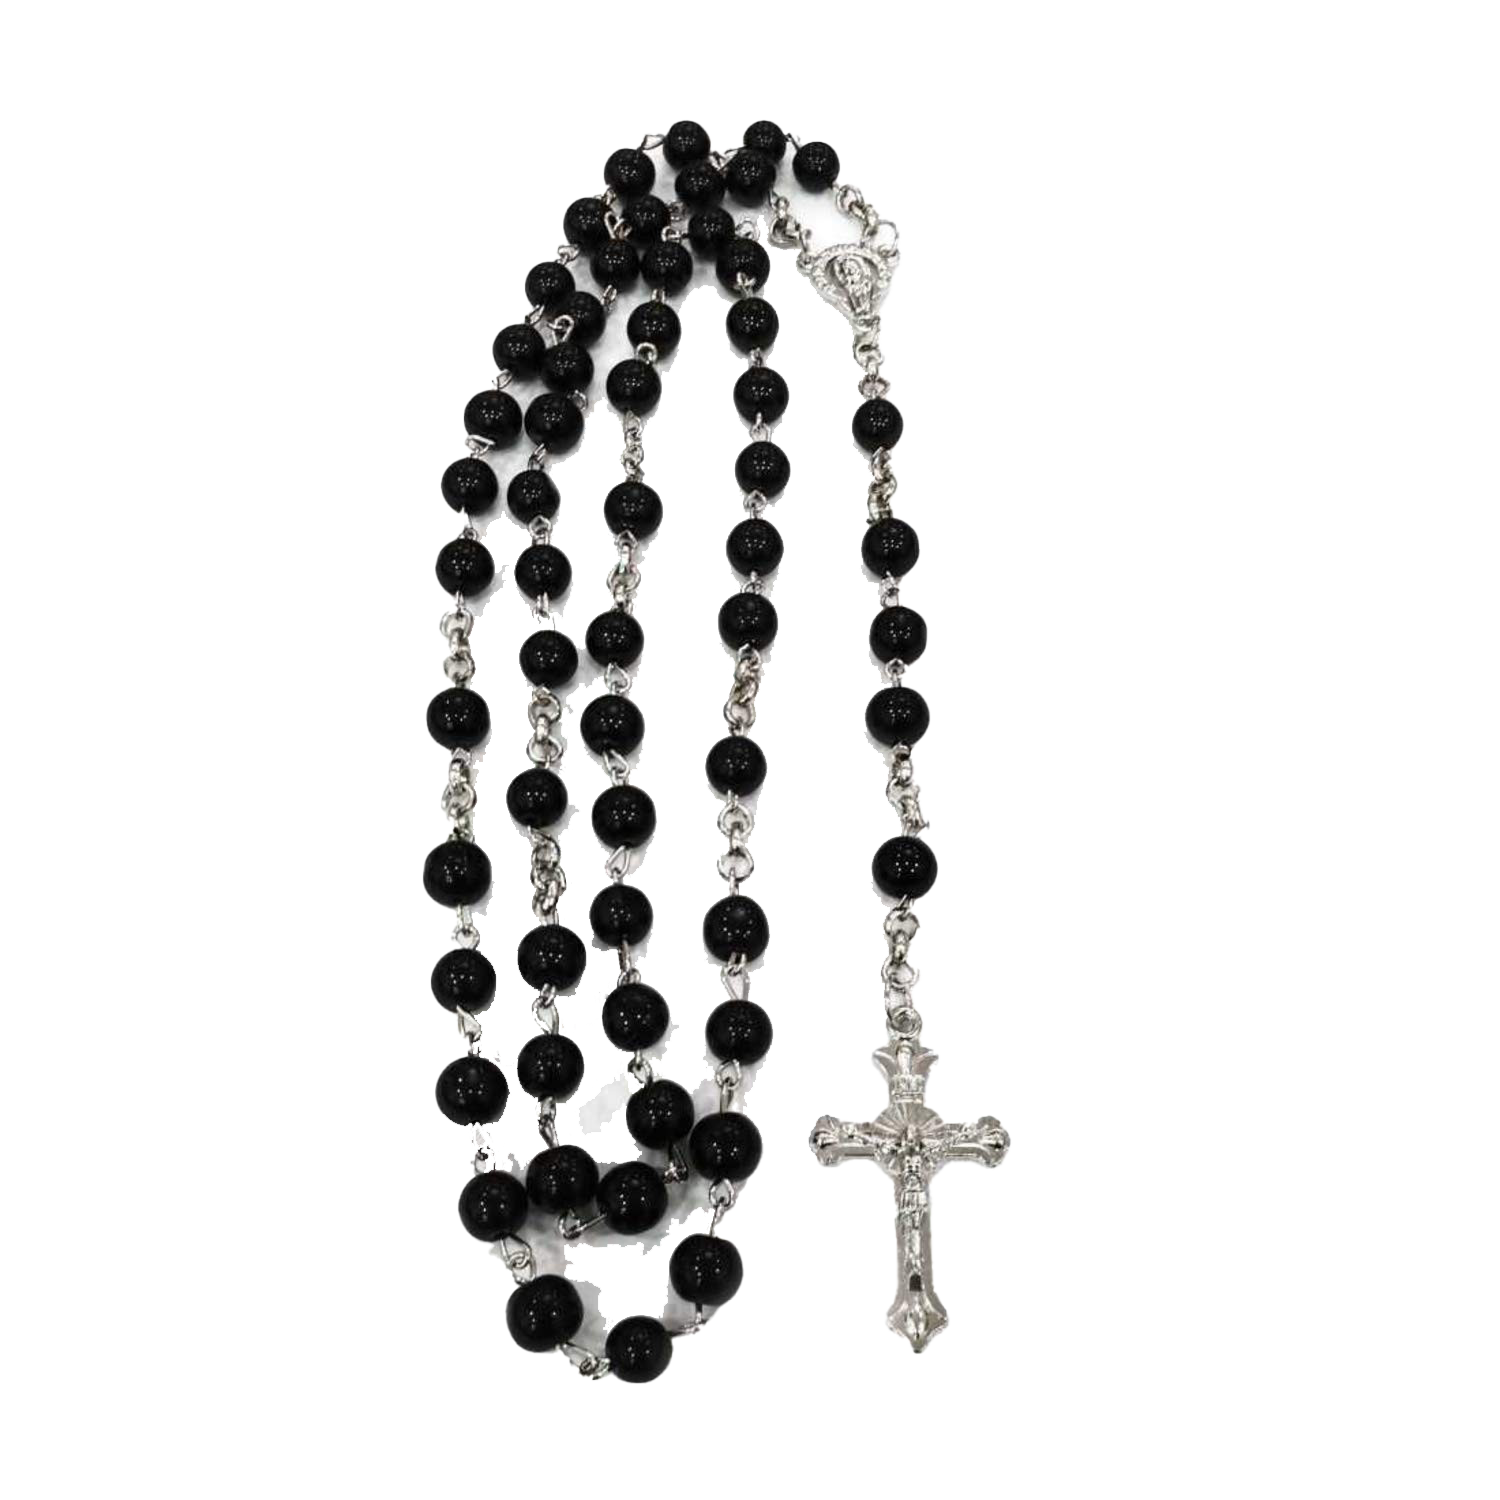 Beads Rosary Free PNG HQ PNG Image